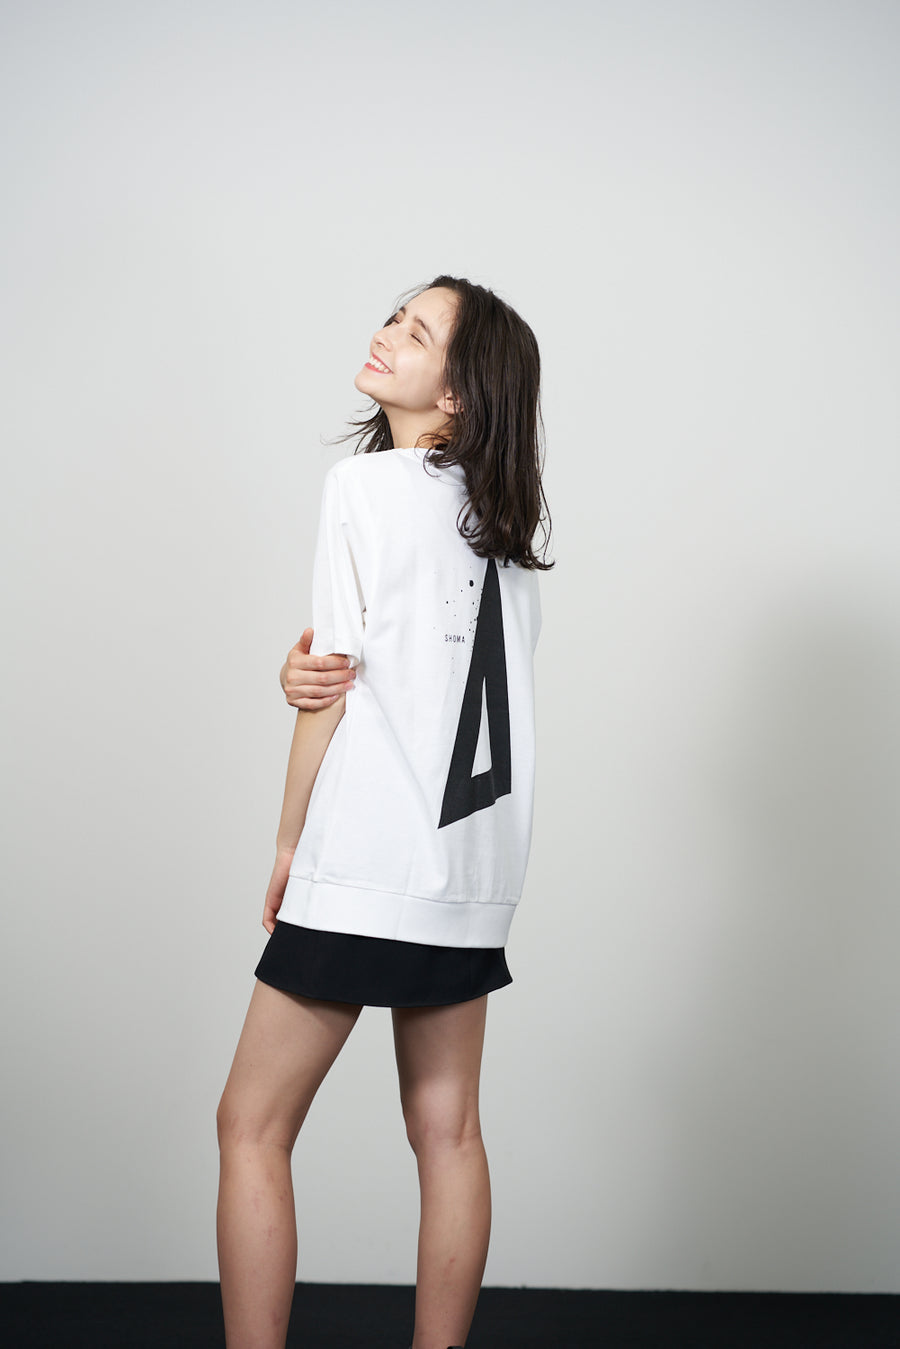 JERSEY BOAT NECK T［Triangle of SHOMA］- White